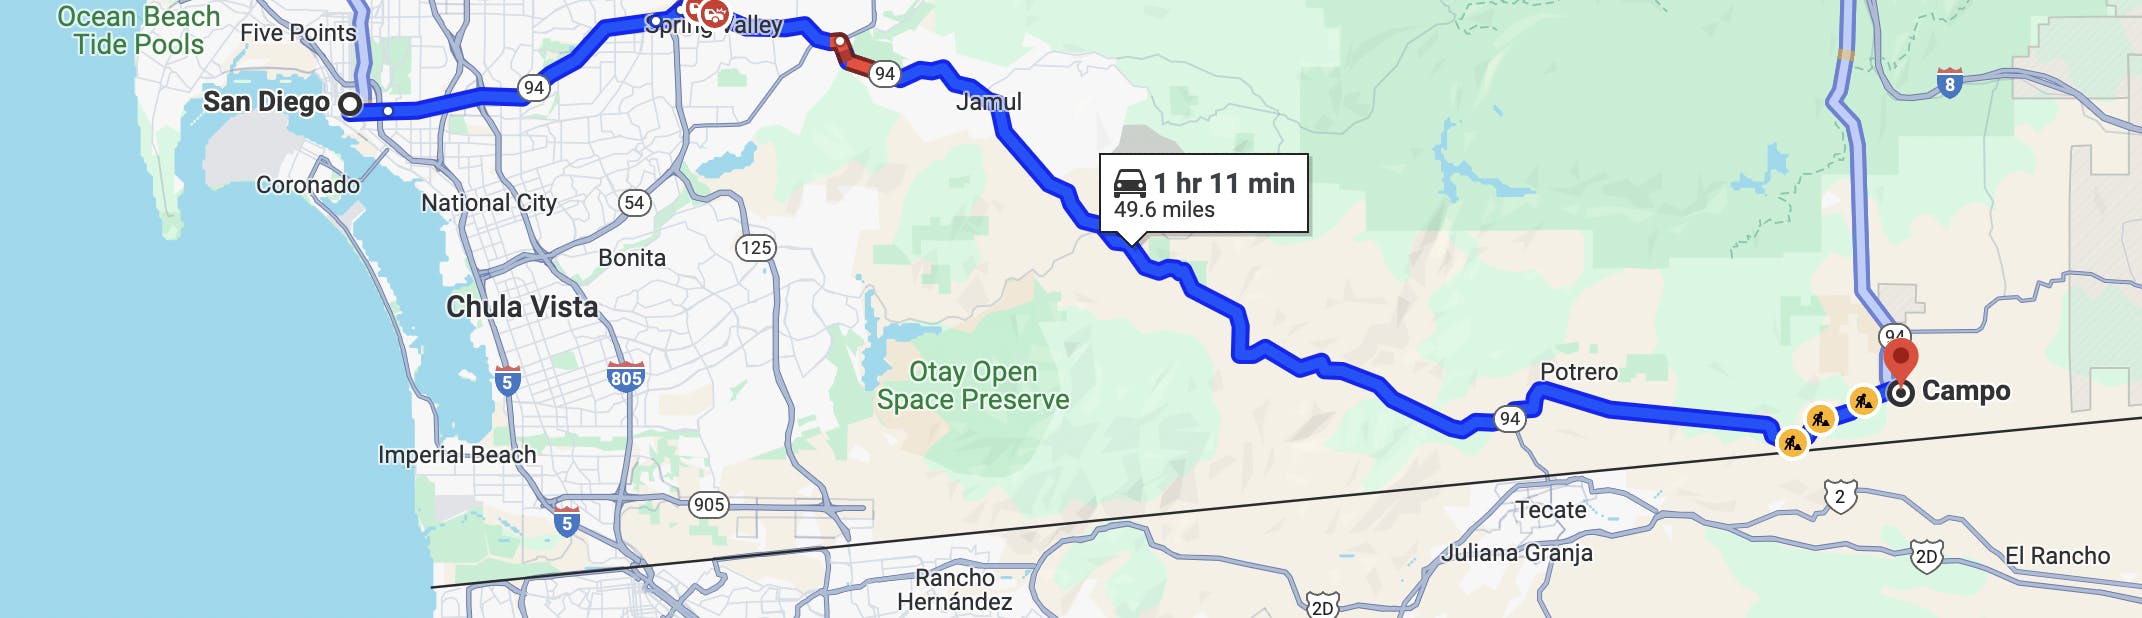 map of best motorcycle rides in san diego - highway 94 route